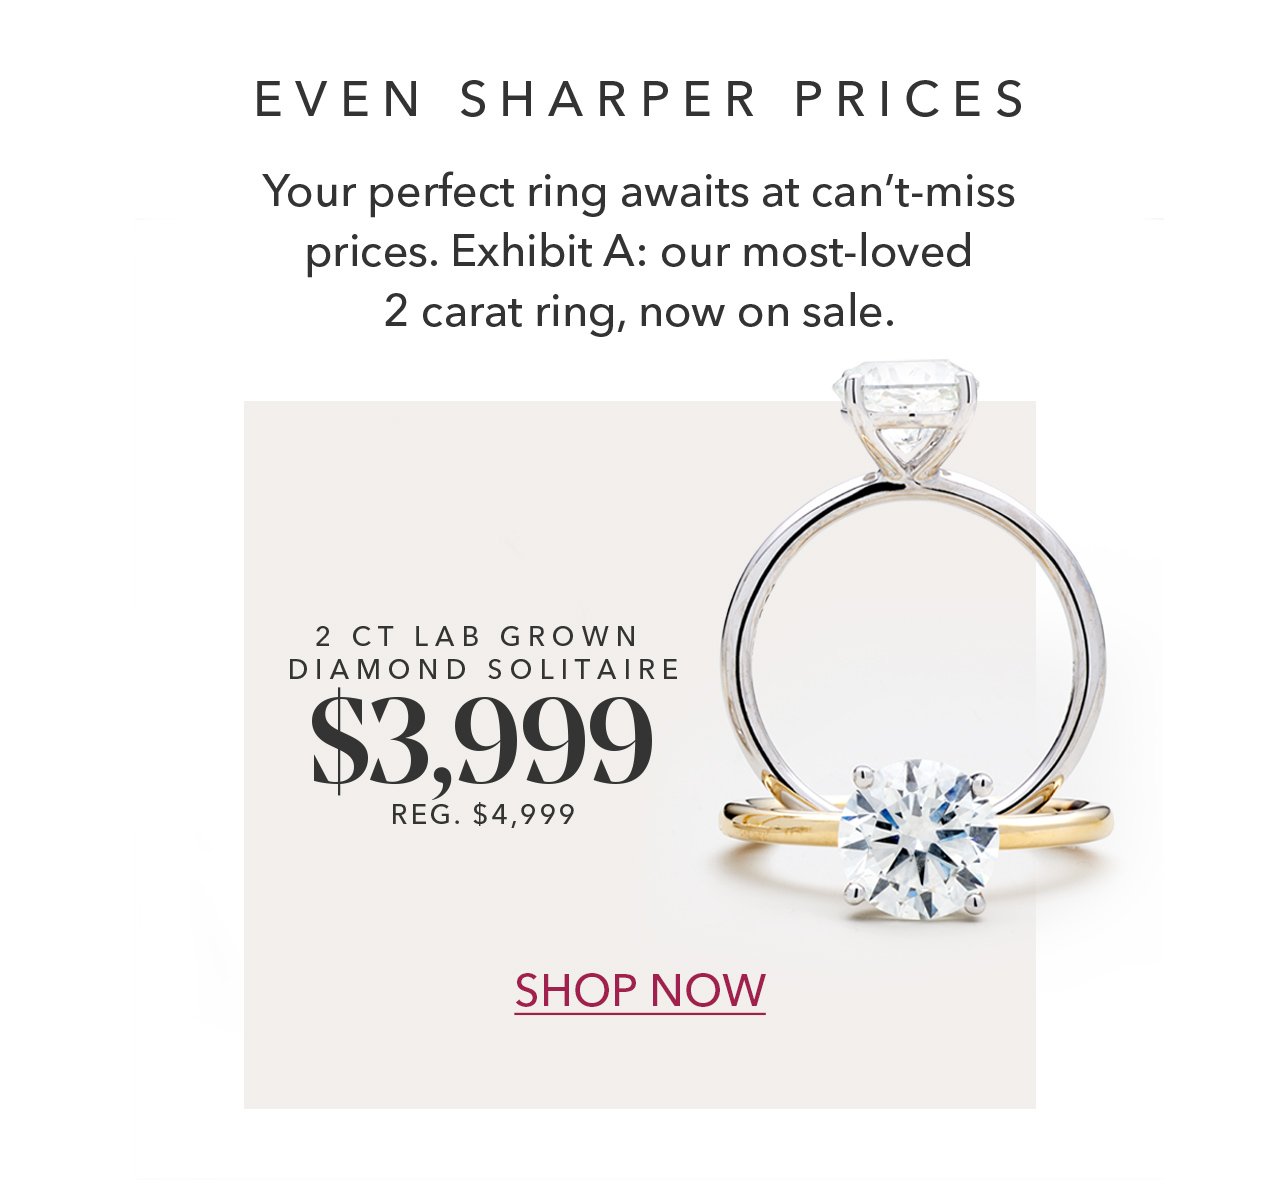 EVEN SHARPER PRICES | Your perfect ring awaits at can't-miss prices. Exhibit A: our most-loved 2 carat ring, now on sale. 2 CT LAB GROWN DIAMOND SOLITAIRE \\$3,999 REG. \\$4,999 | SHOP NOW